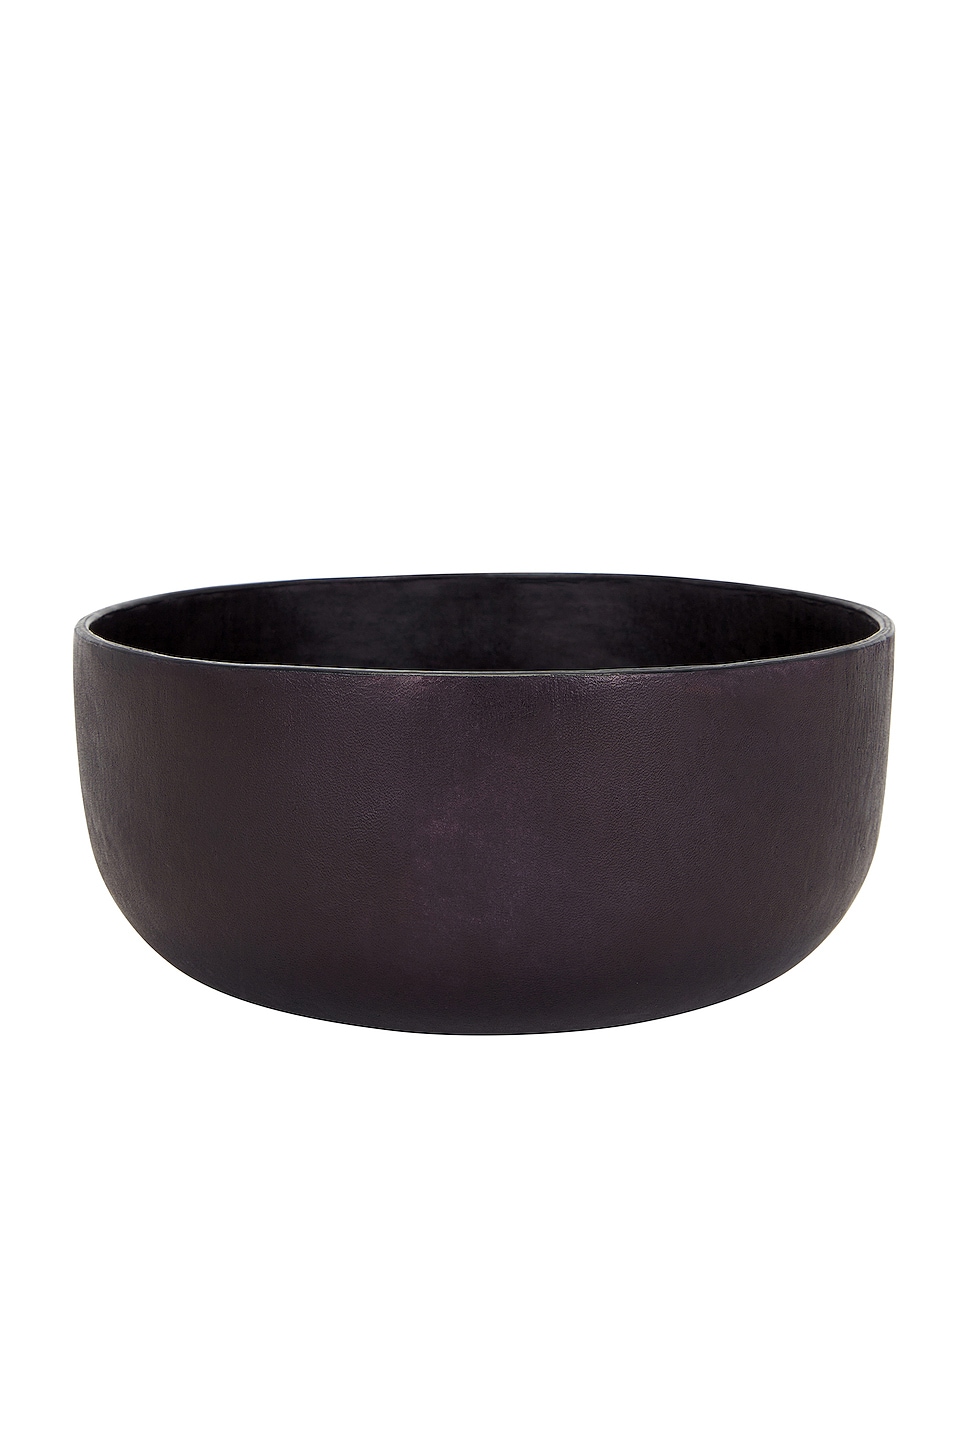 Image 1 of Hunting Season Molded Leather Bowl in Black